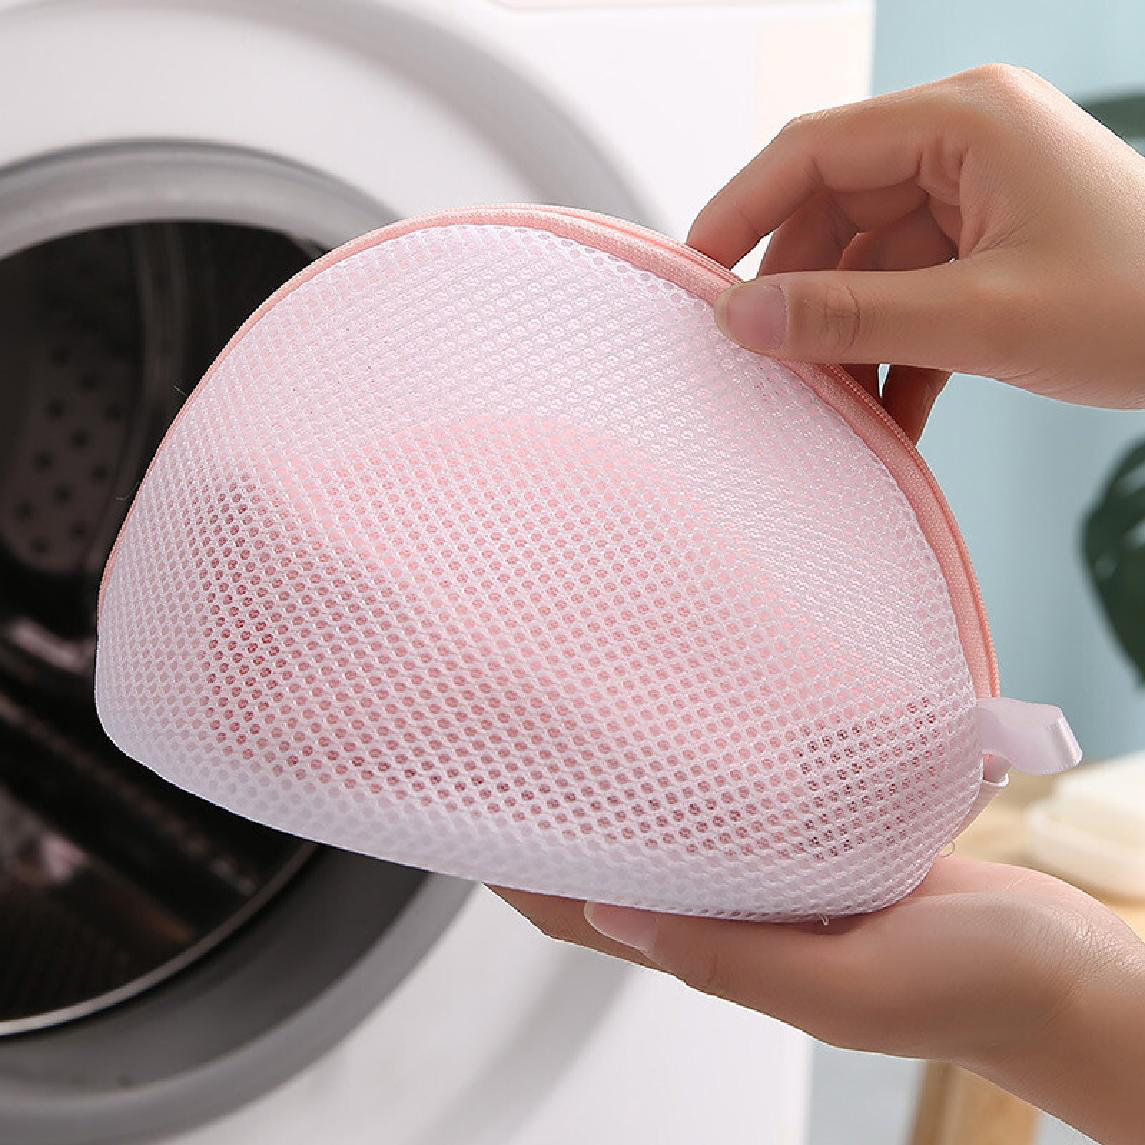 Mesh Laundry Bags for Cloth Washing (Set of 3) - Great for Machine Washing  Bag and Garment